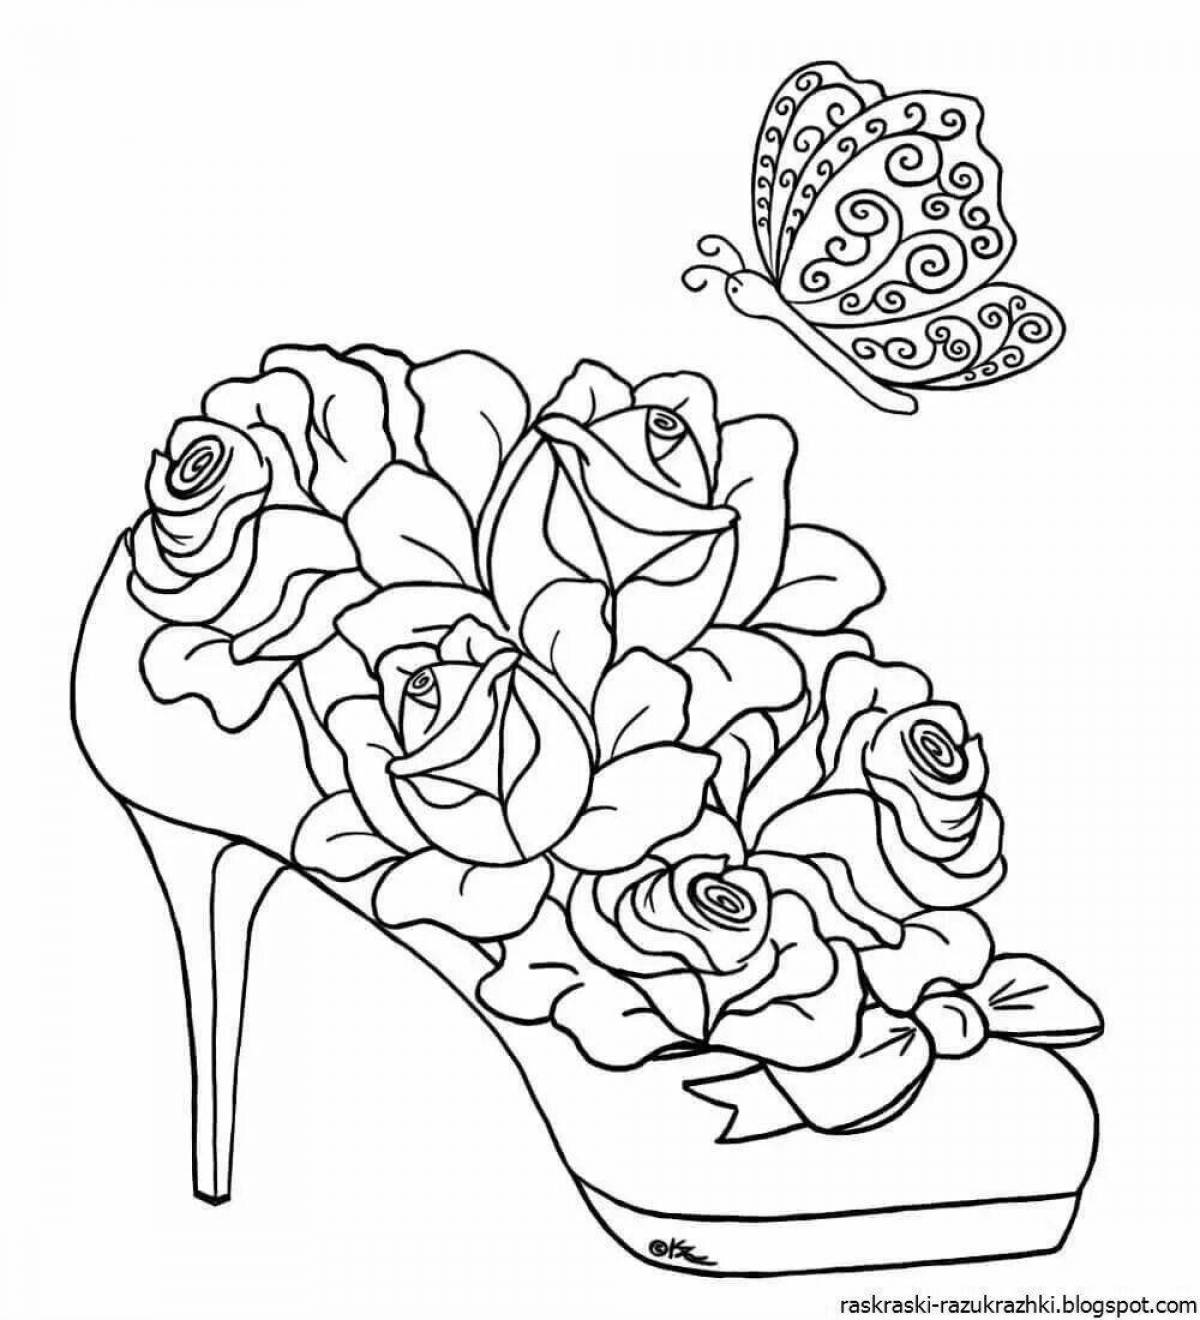 Glowing rose coloring book for girls